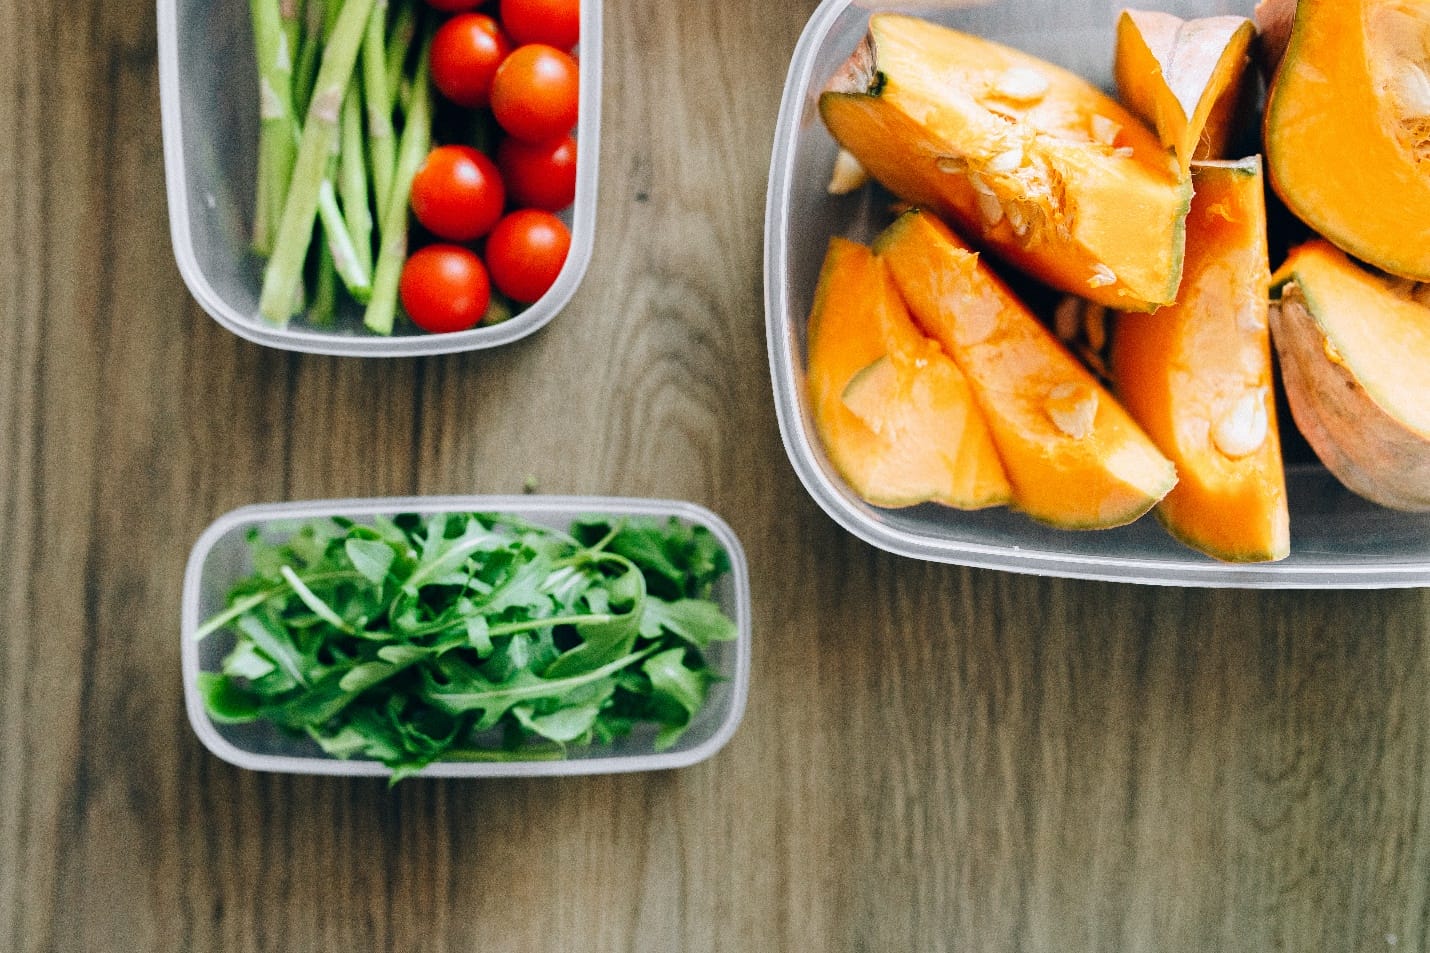 What Are the Dangers Associated with Storing Food in Plastic Containers?